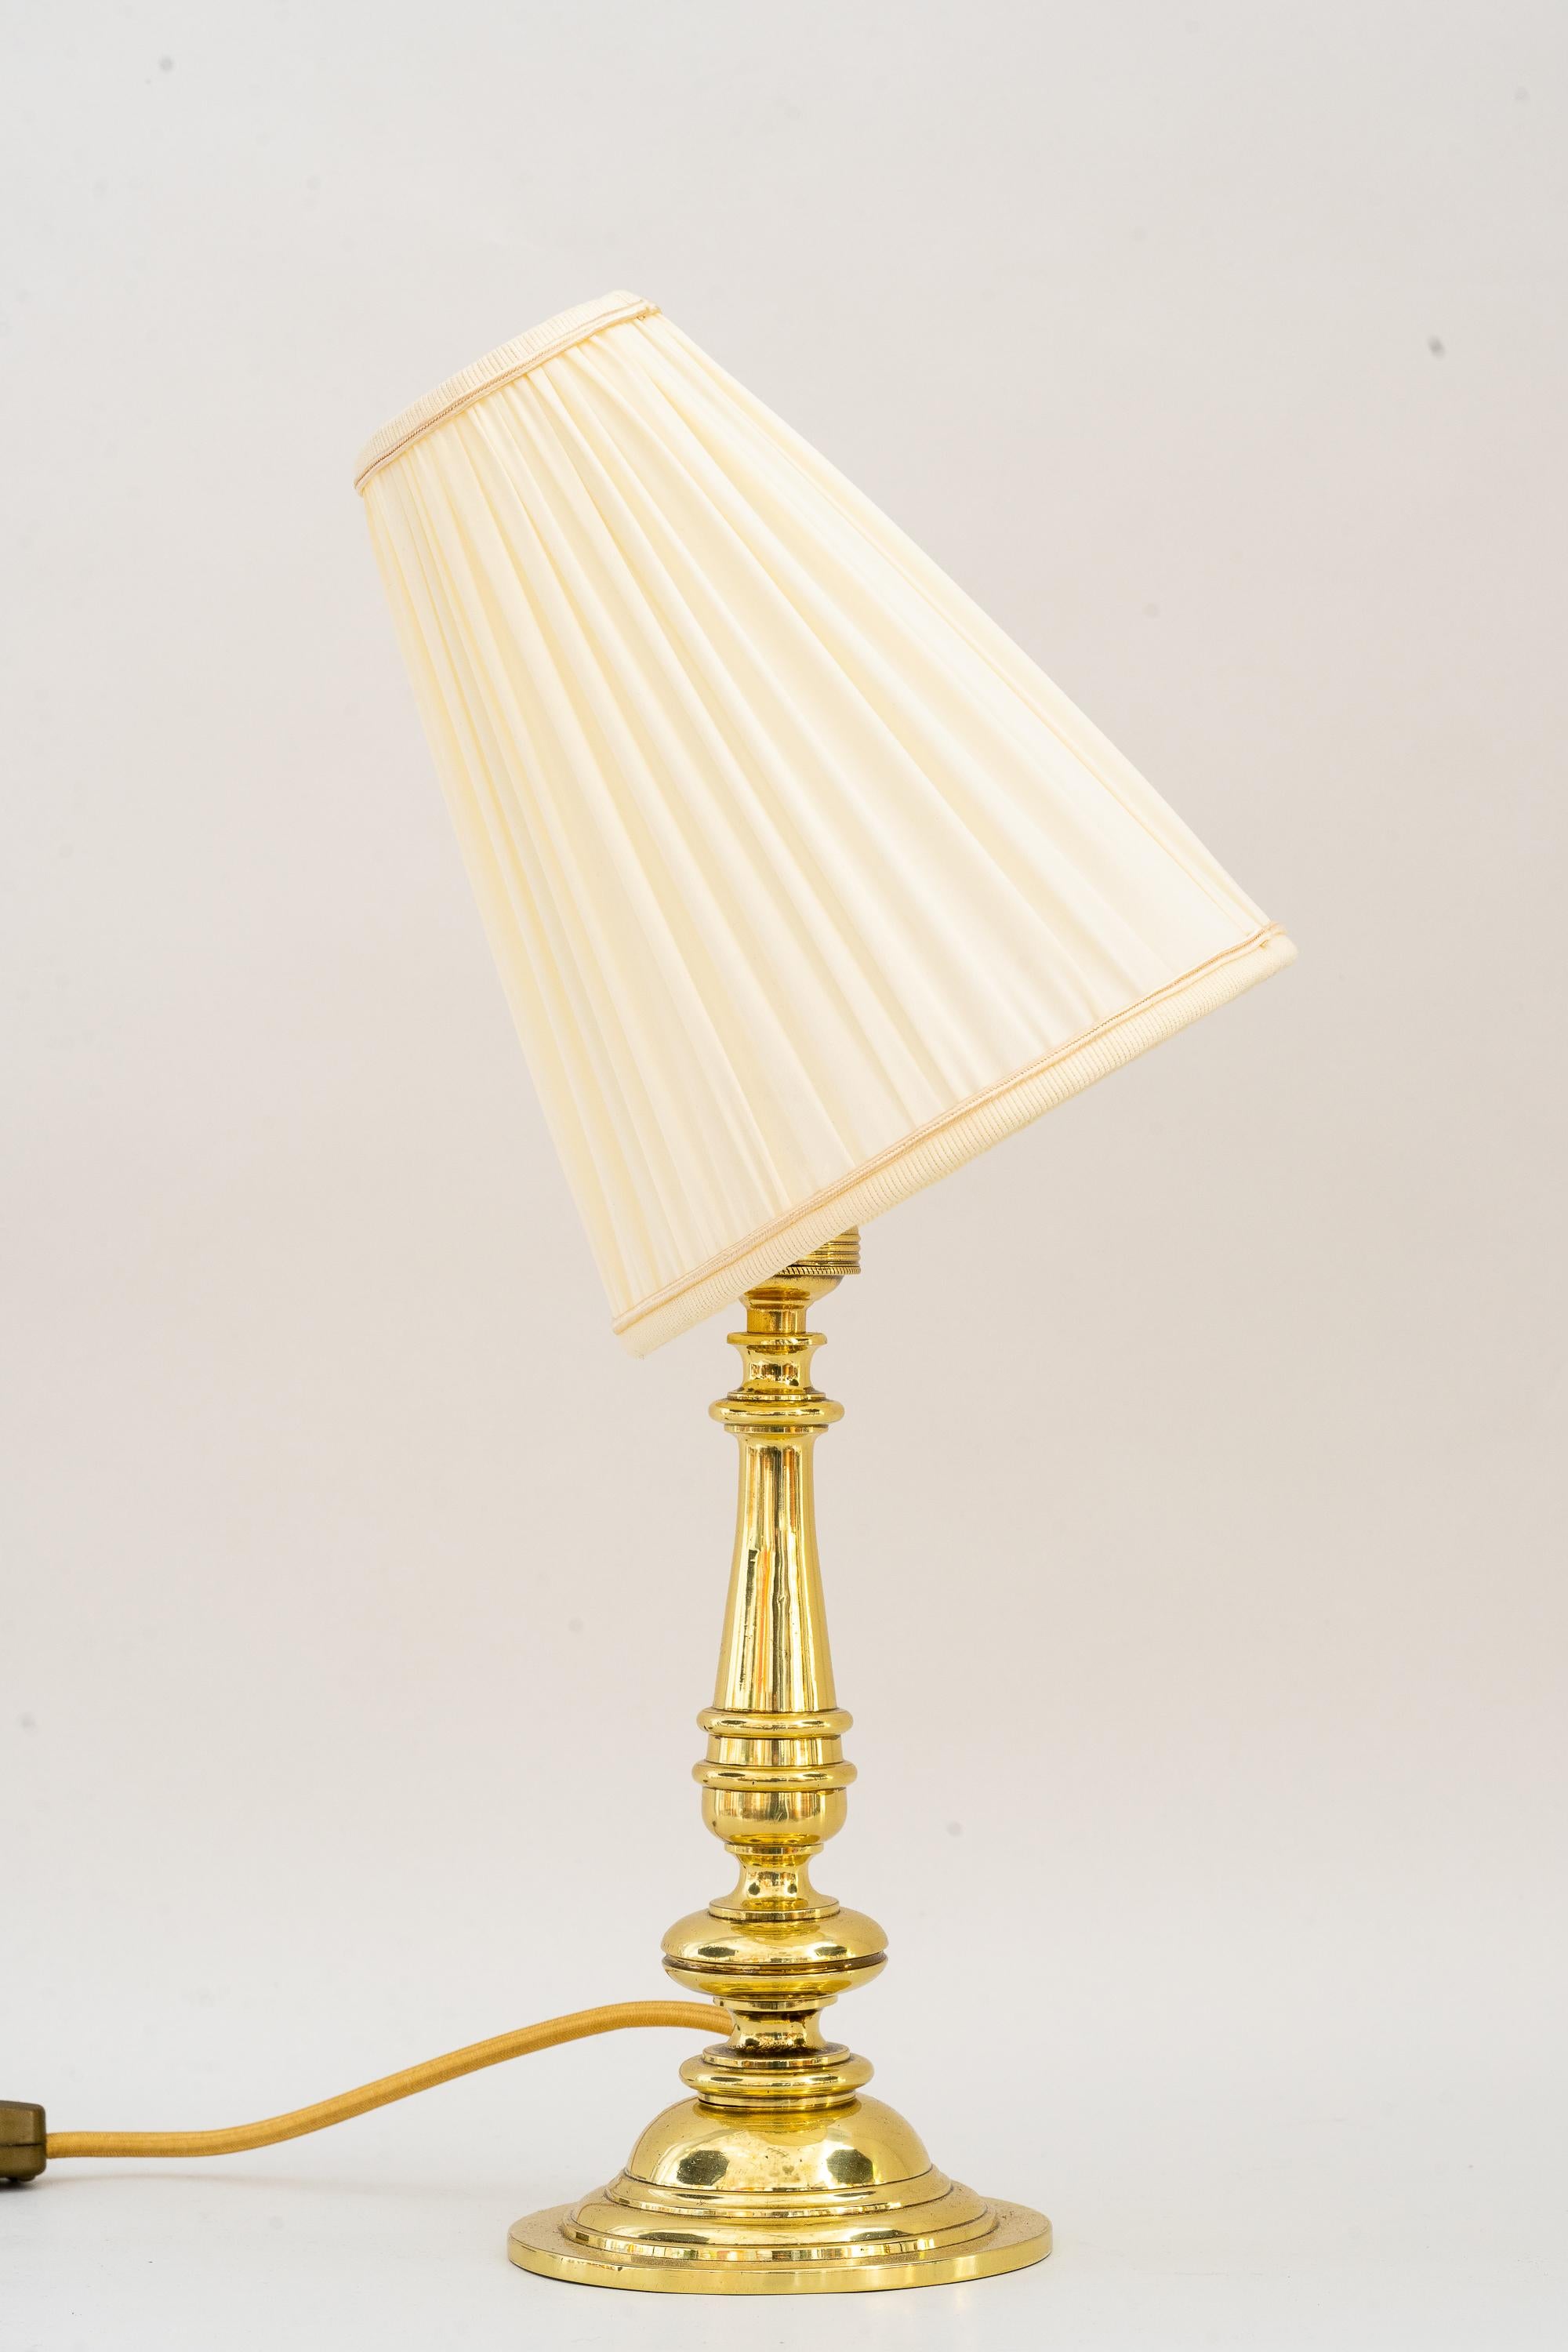 Art Deco table lamp with fabric shade vienna around 1920s 
The shade is replaced ( new )
Polished and stove enameled.